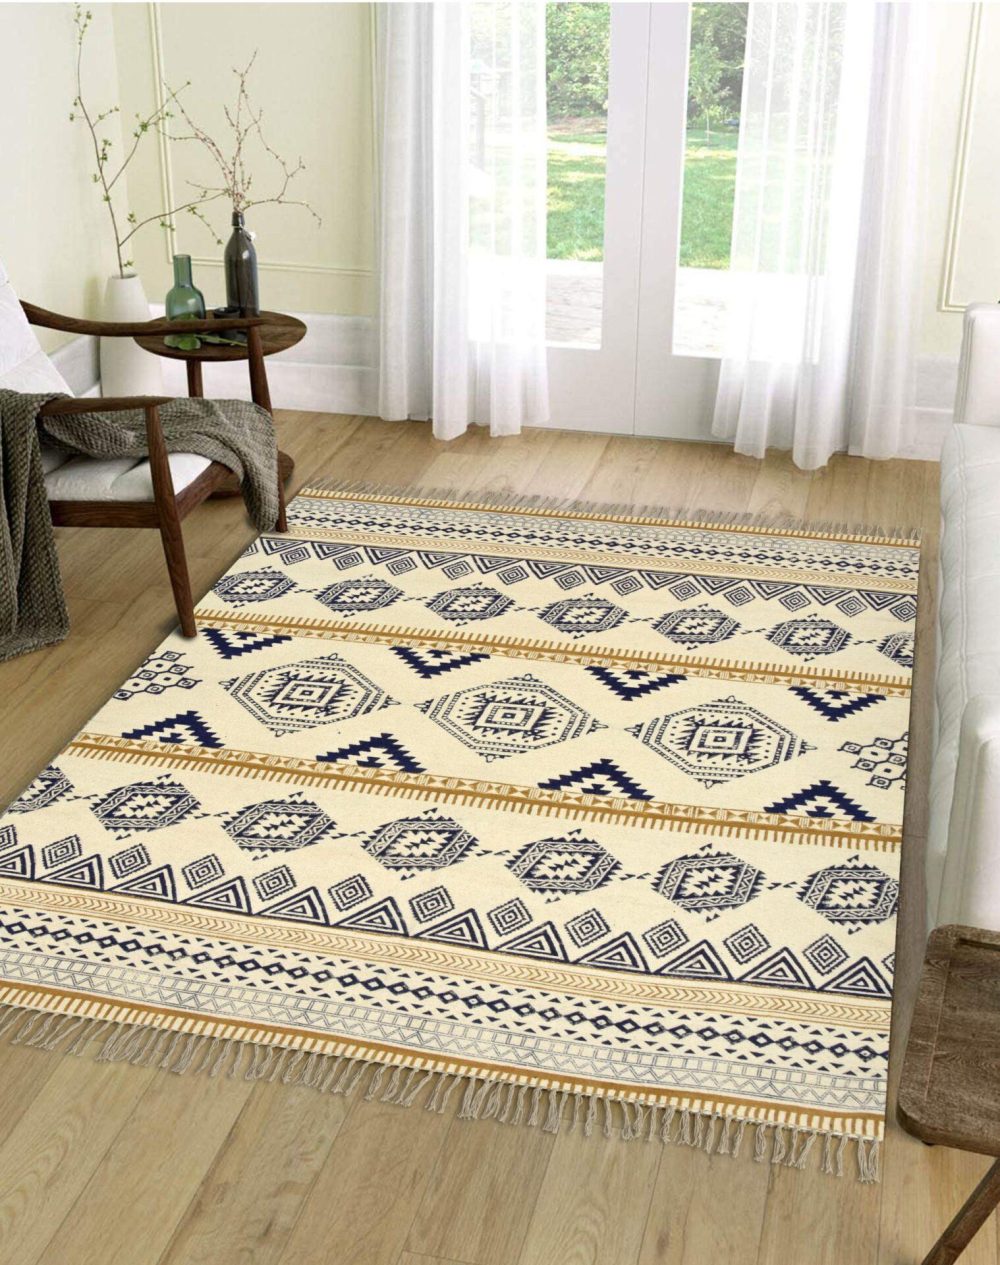 The Aztec Glory Ethnic Rug - Rajasthan Rugs 6